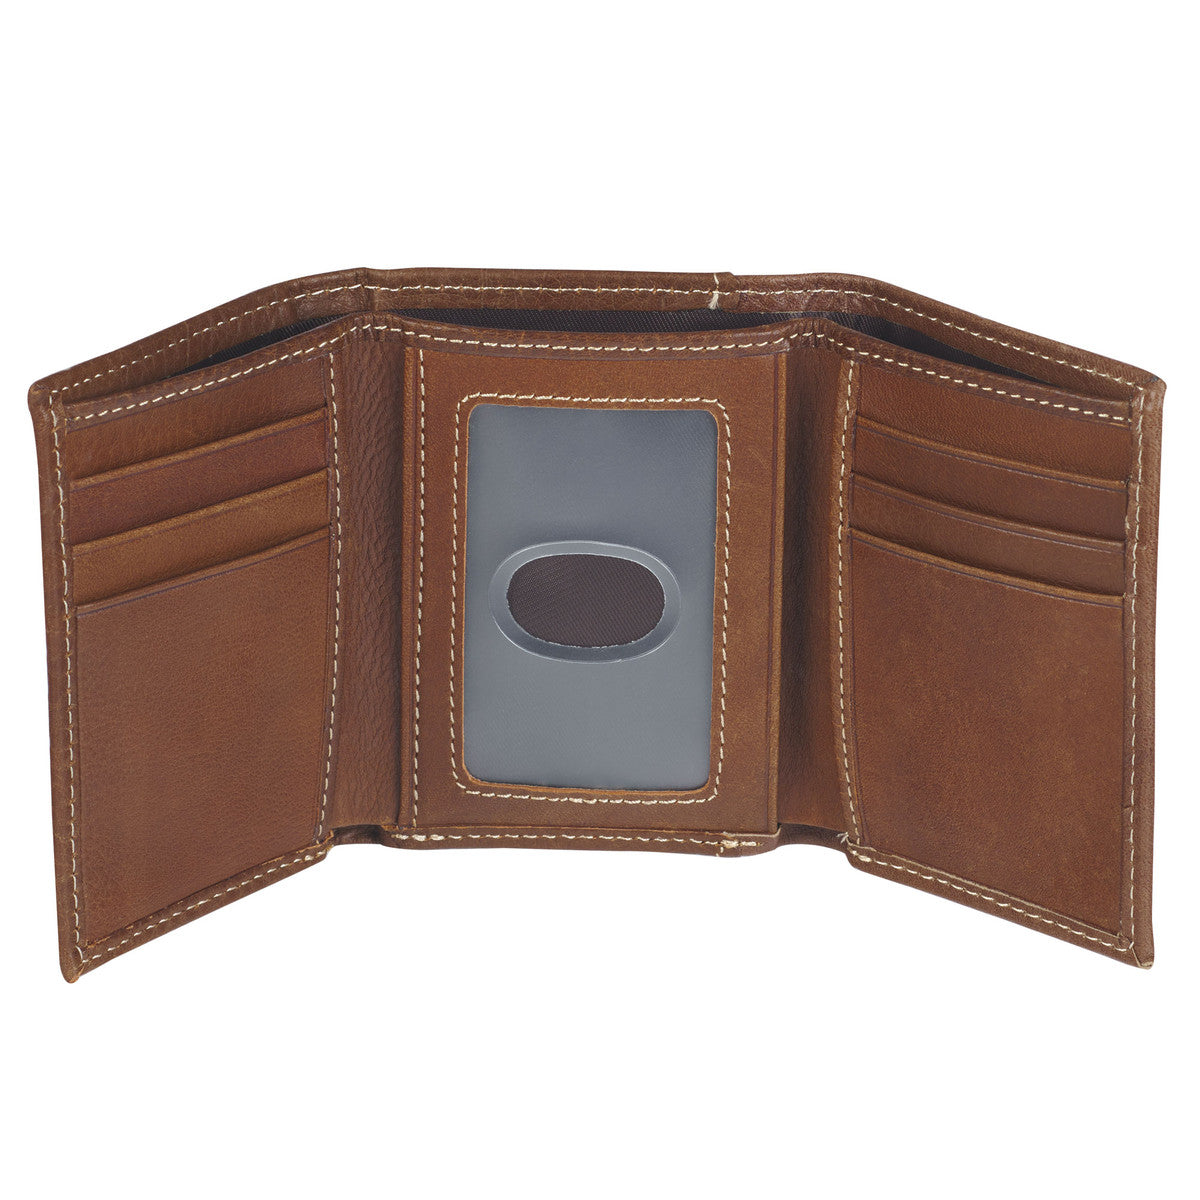 Ichthus Fish Brown Genuine Leather Trifold Wallet - The Christian Gift Company